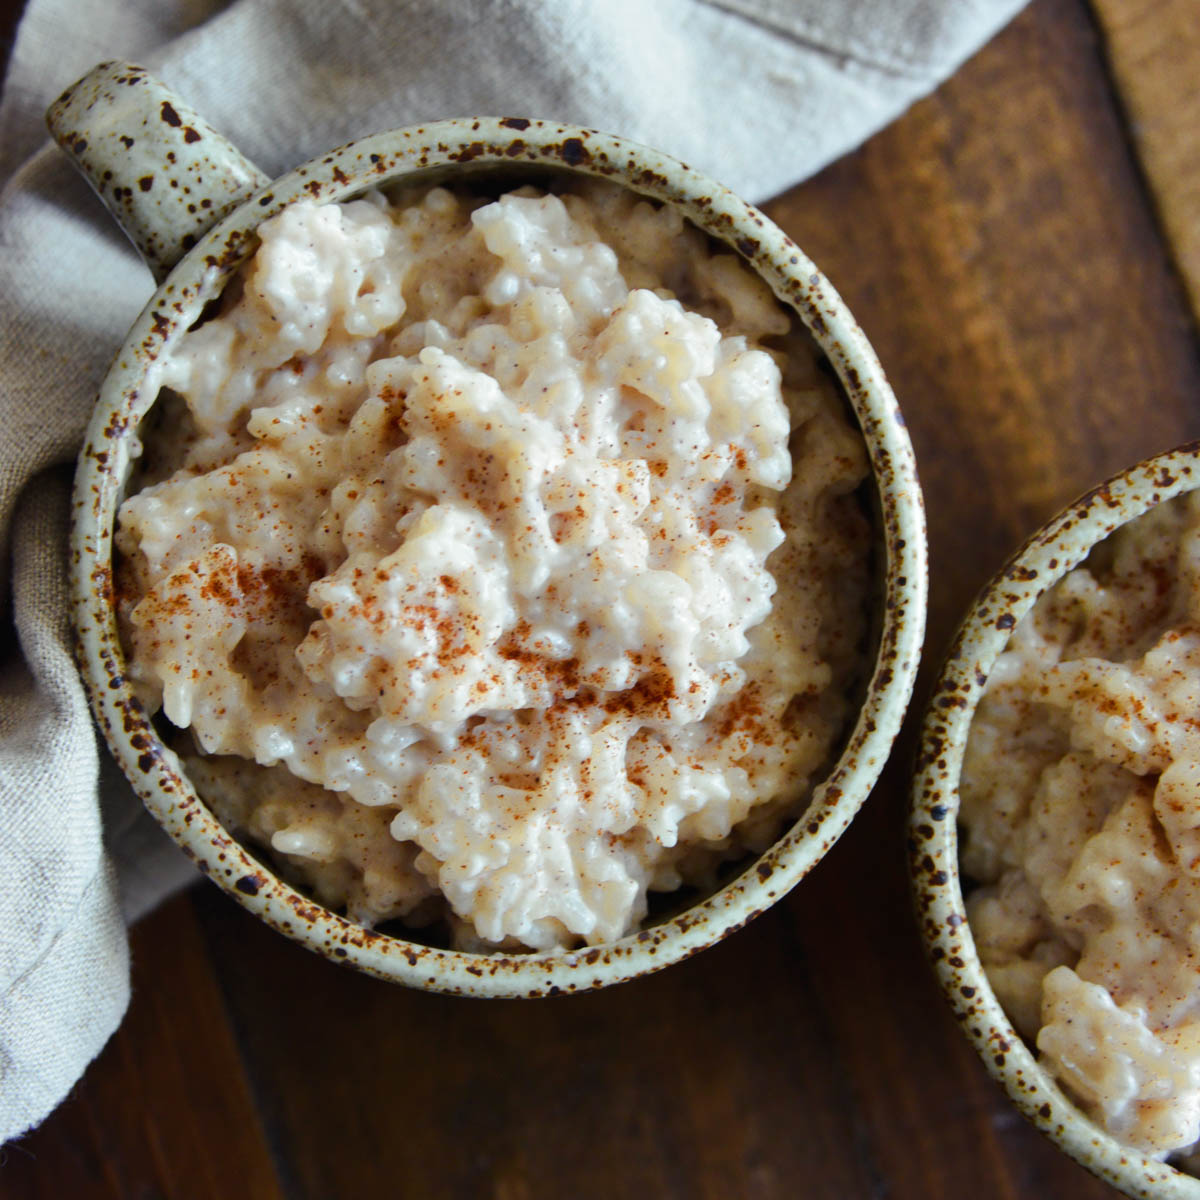 A speckled pottery mug filled with creamy old fashioned rice pudding dusted with cinnamon.